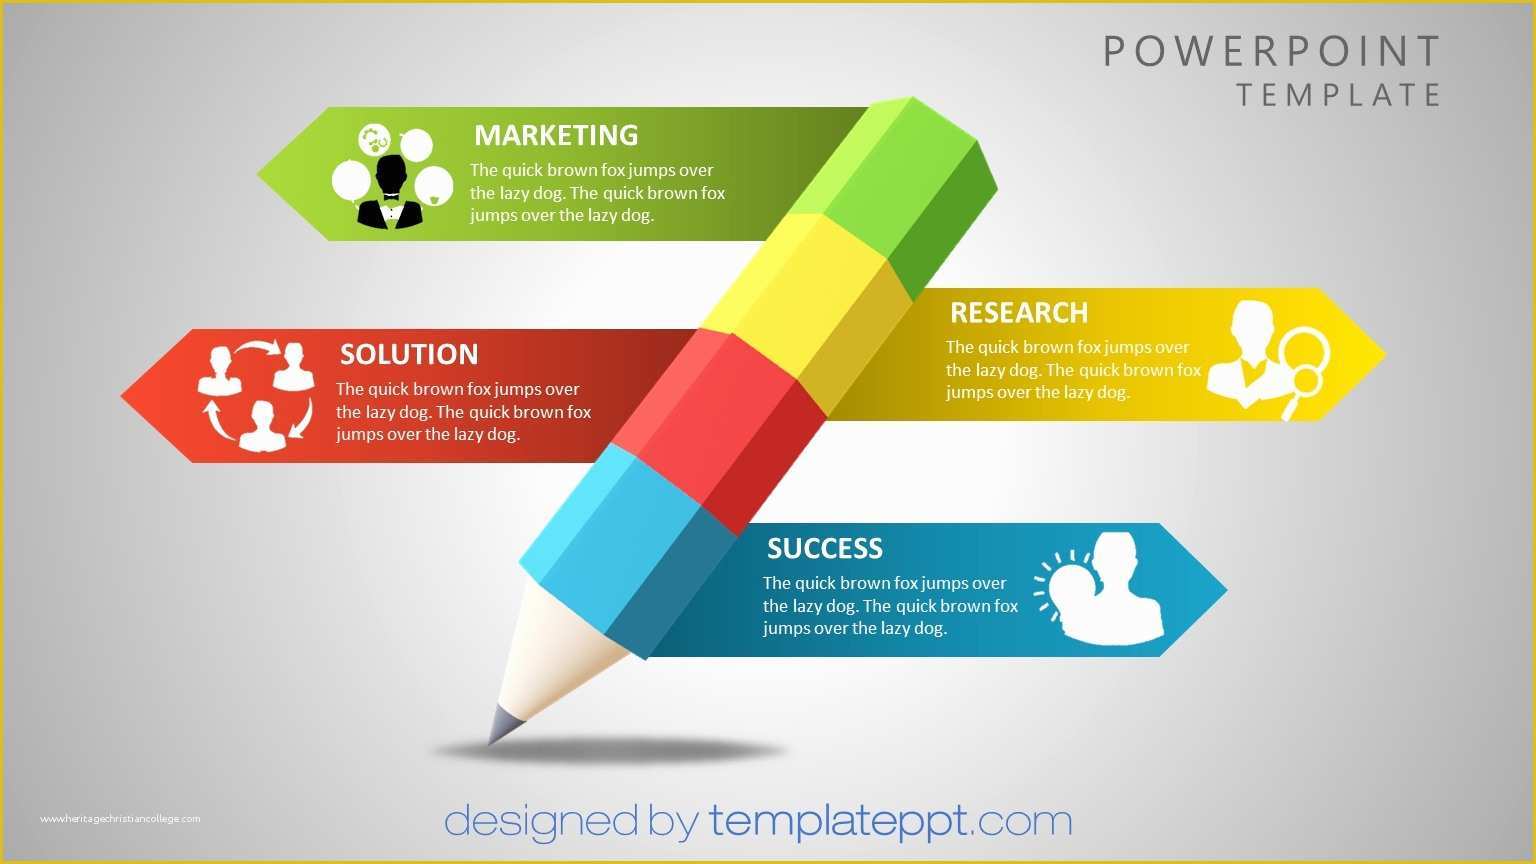 Powerpoint Templates Free Download 2018 Of Best Ppt Templates Free Download 2018